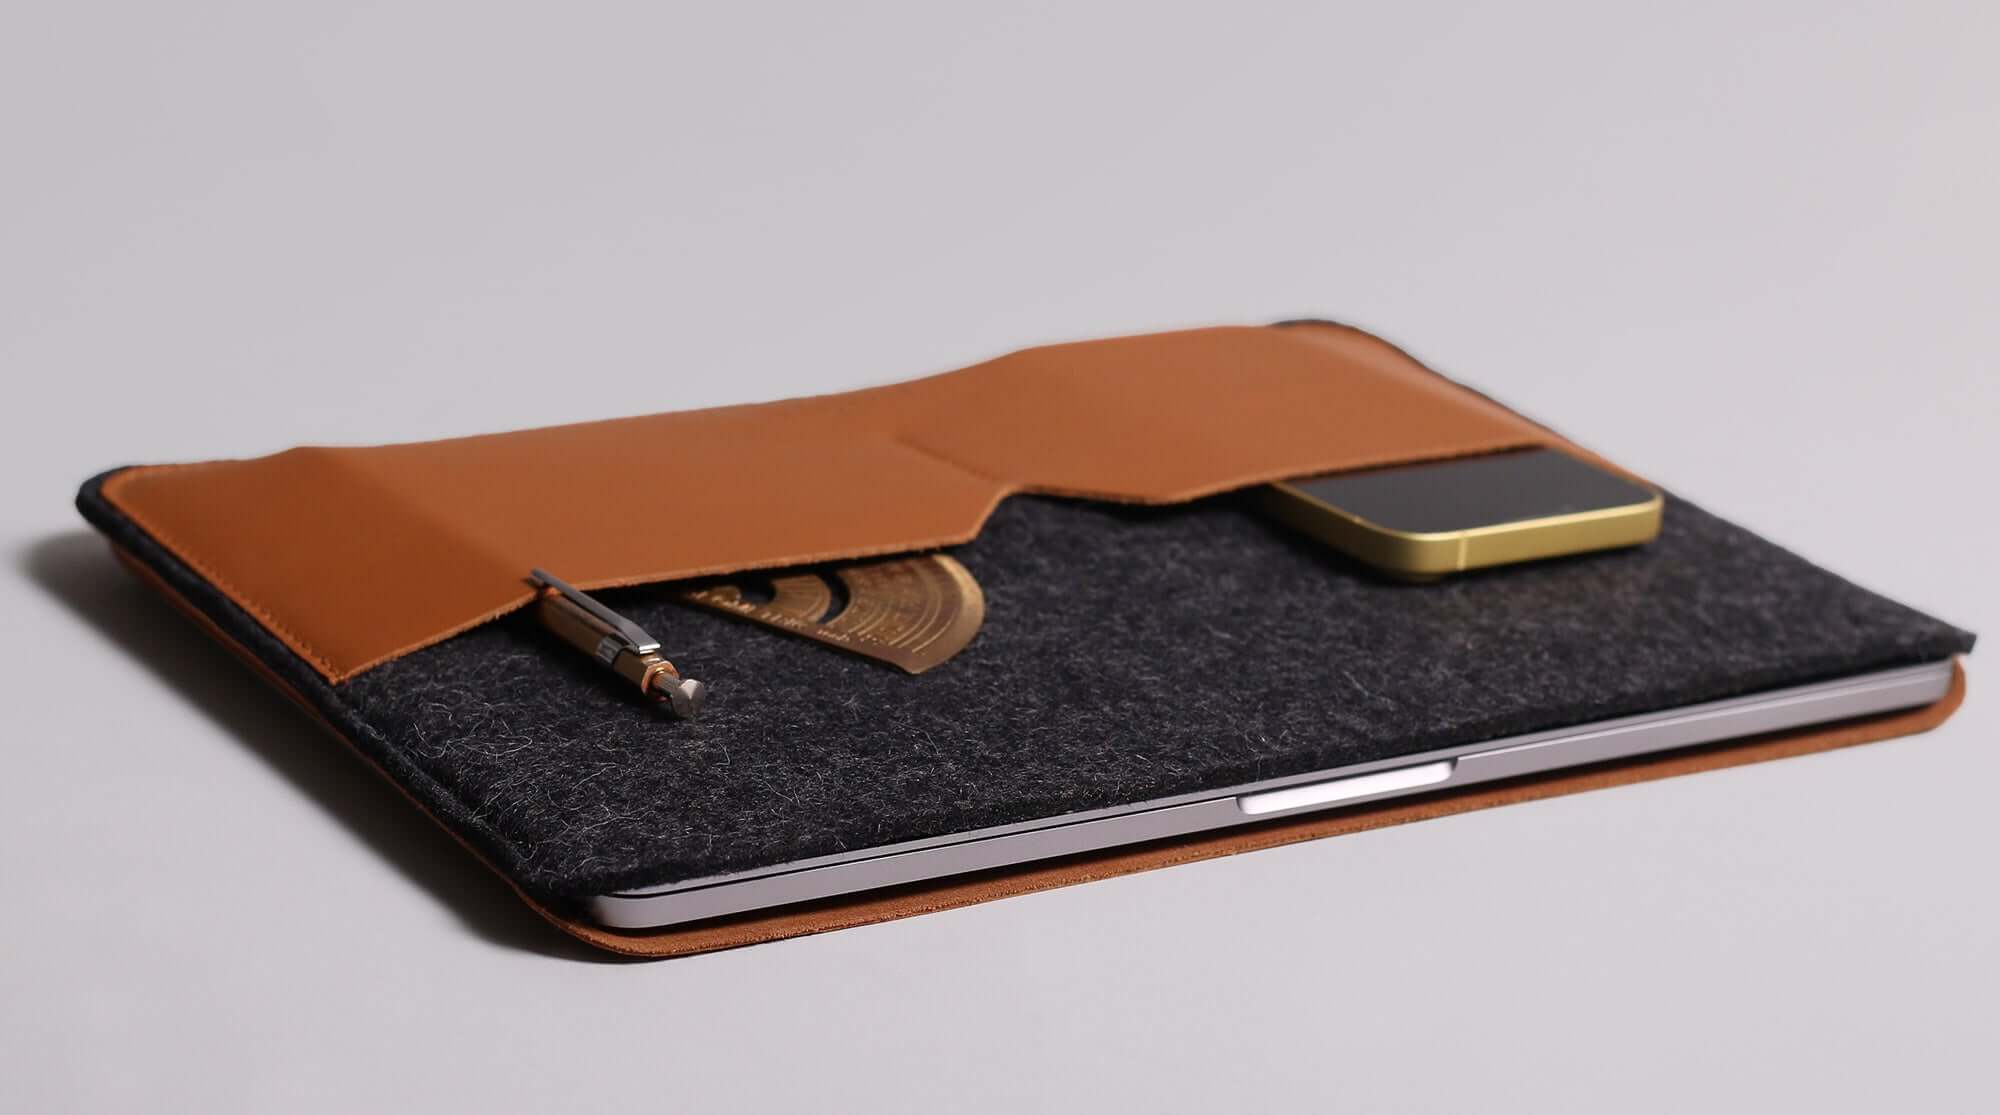 Slim leather and felt MacBook Sleeve case with front pockets